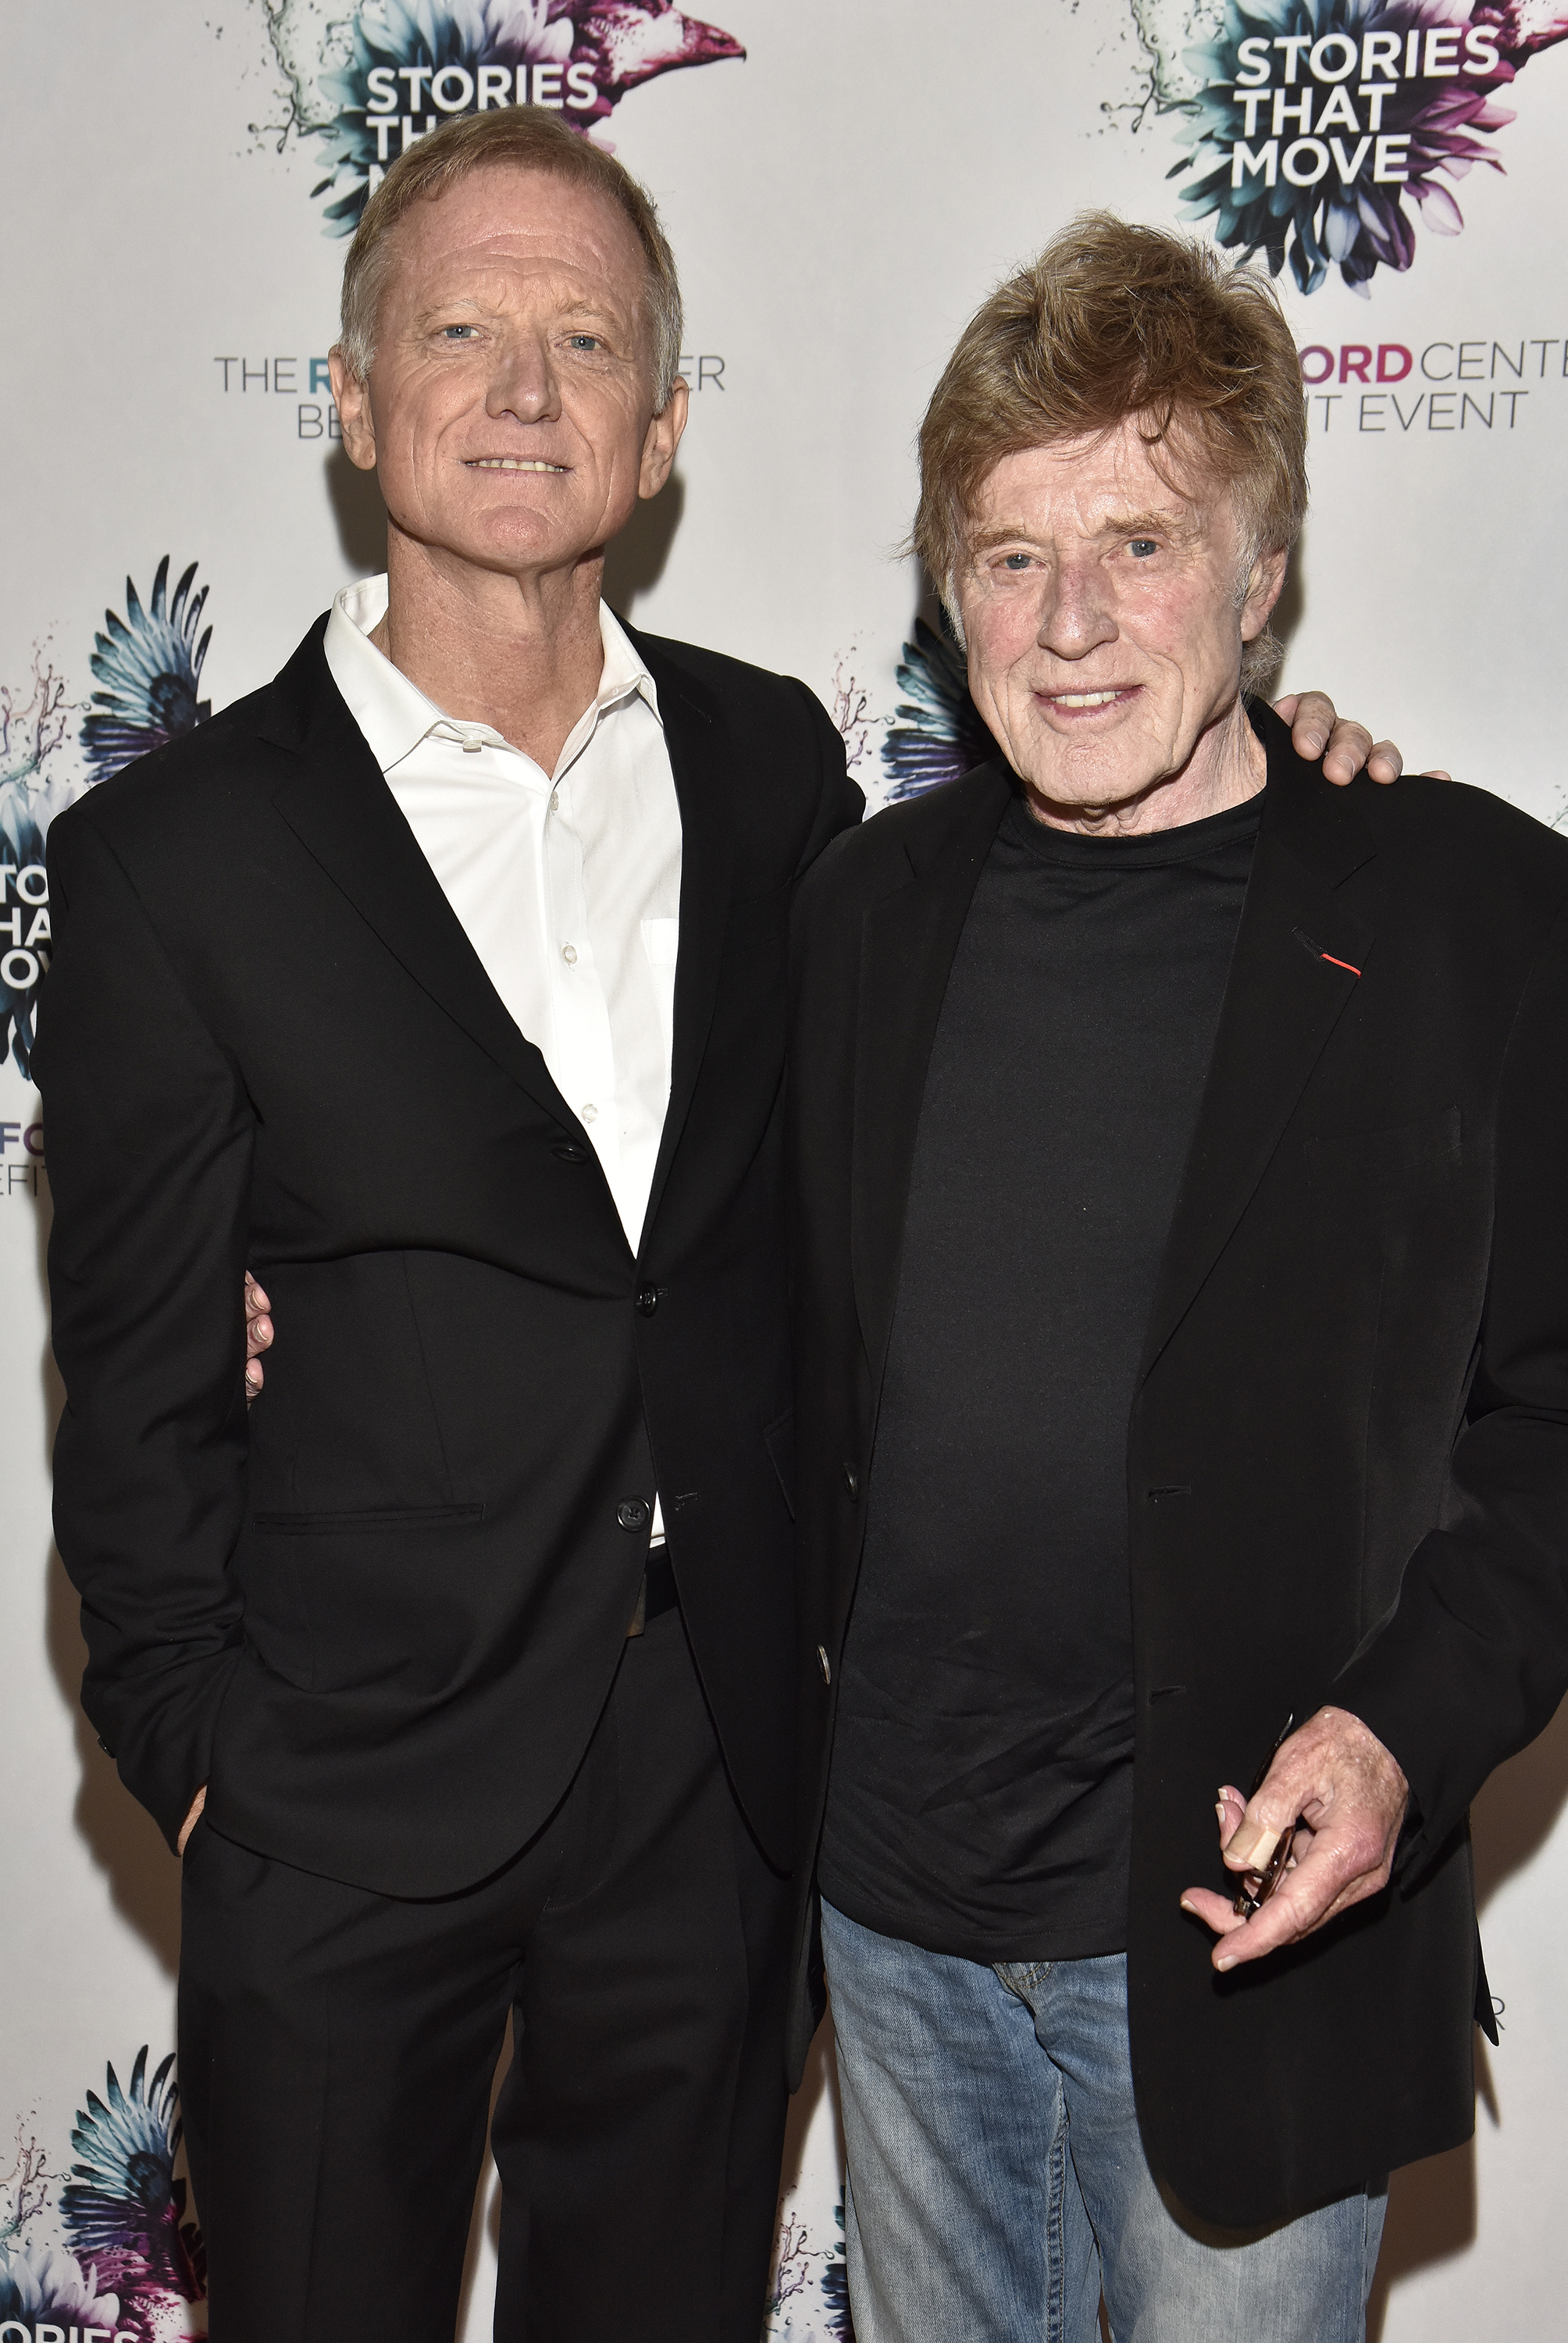 James Redford and Robert Redford attend The Redford Center's Benefit at August Hall in San Francisco, California, on December 6, 2018. | Source: Getty Images